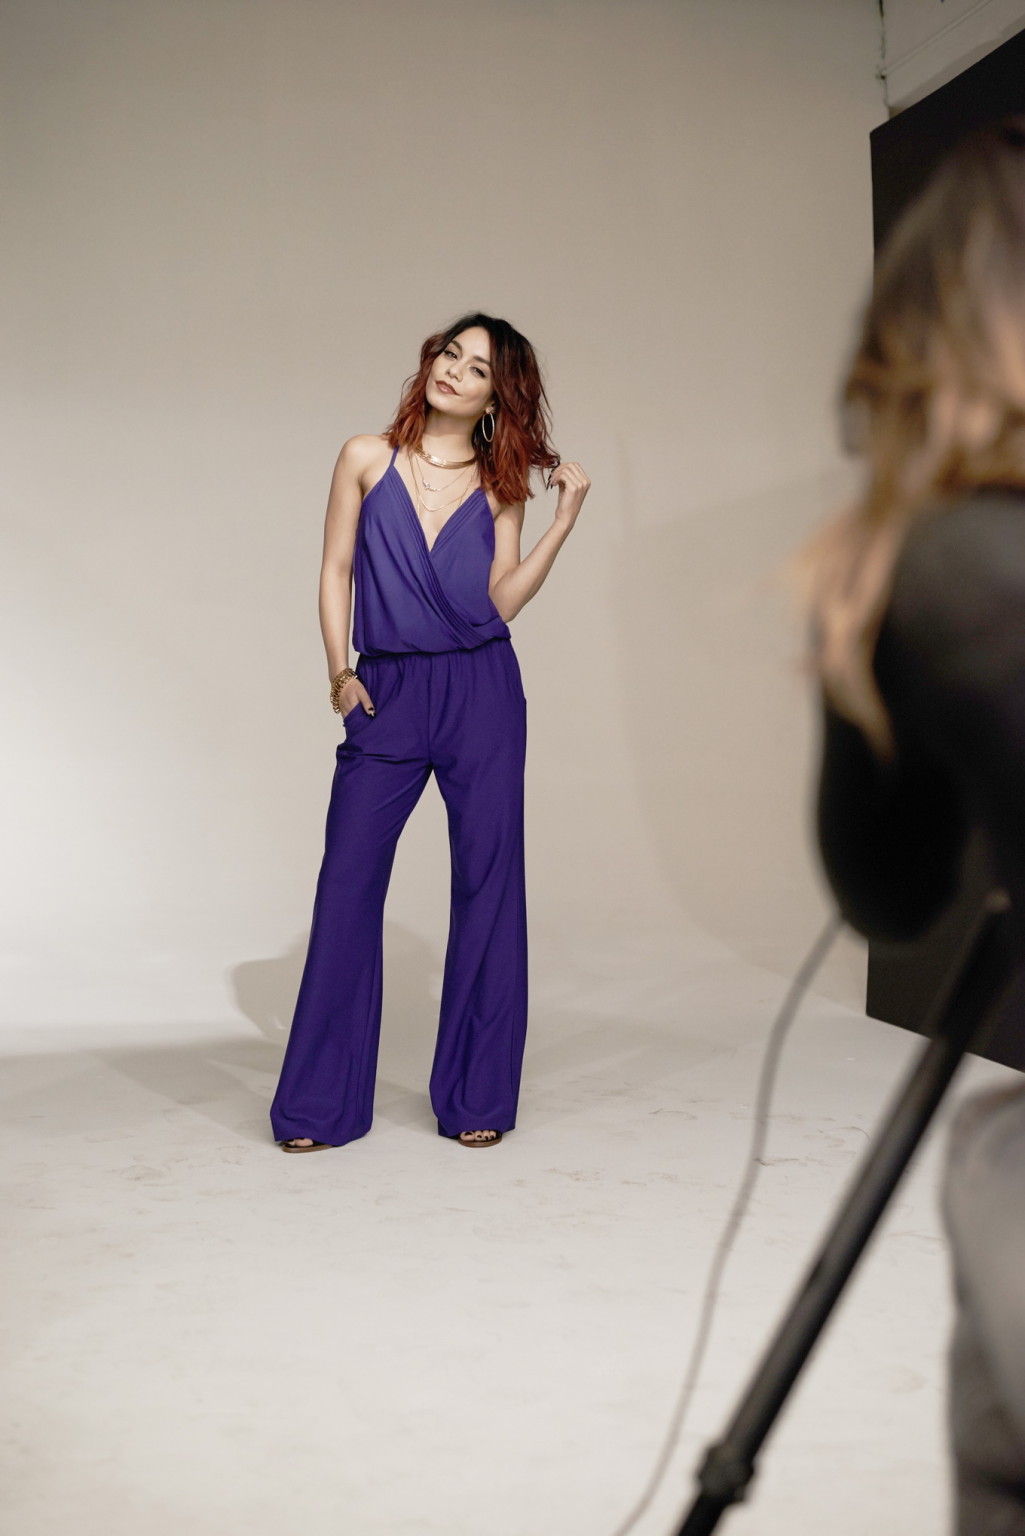 Vanessa Hudgens wearing skimpy undies and outfit for Bongo Spring 2015 Campaign  #75174015